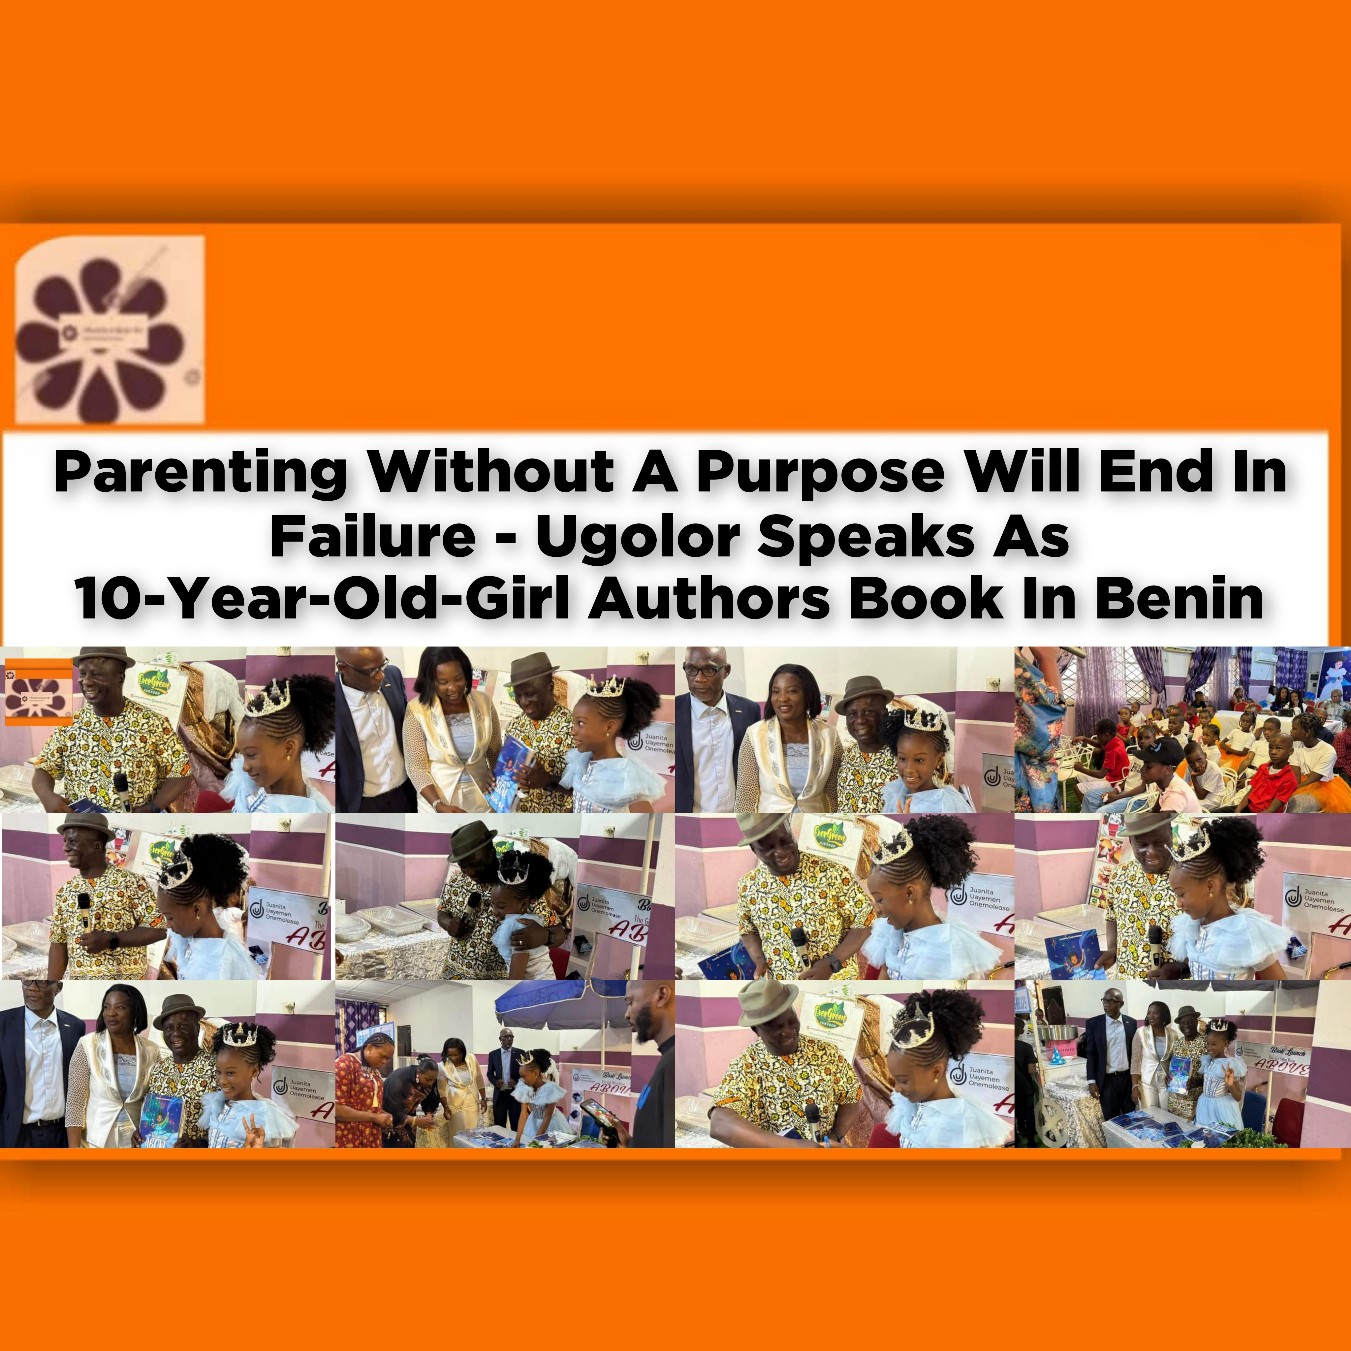 Parenting Without A Purpose Will End In Failure - Ugolor Speaks As 10-Year-Old-Girl Authors Book In Benin ~ OsazuwaAkonedo #ANEEJ #Book #Juanita #Onemolease #Parents